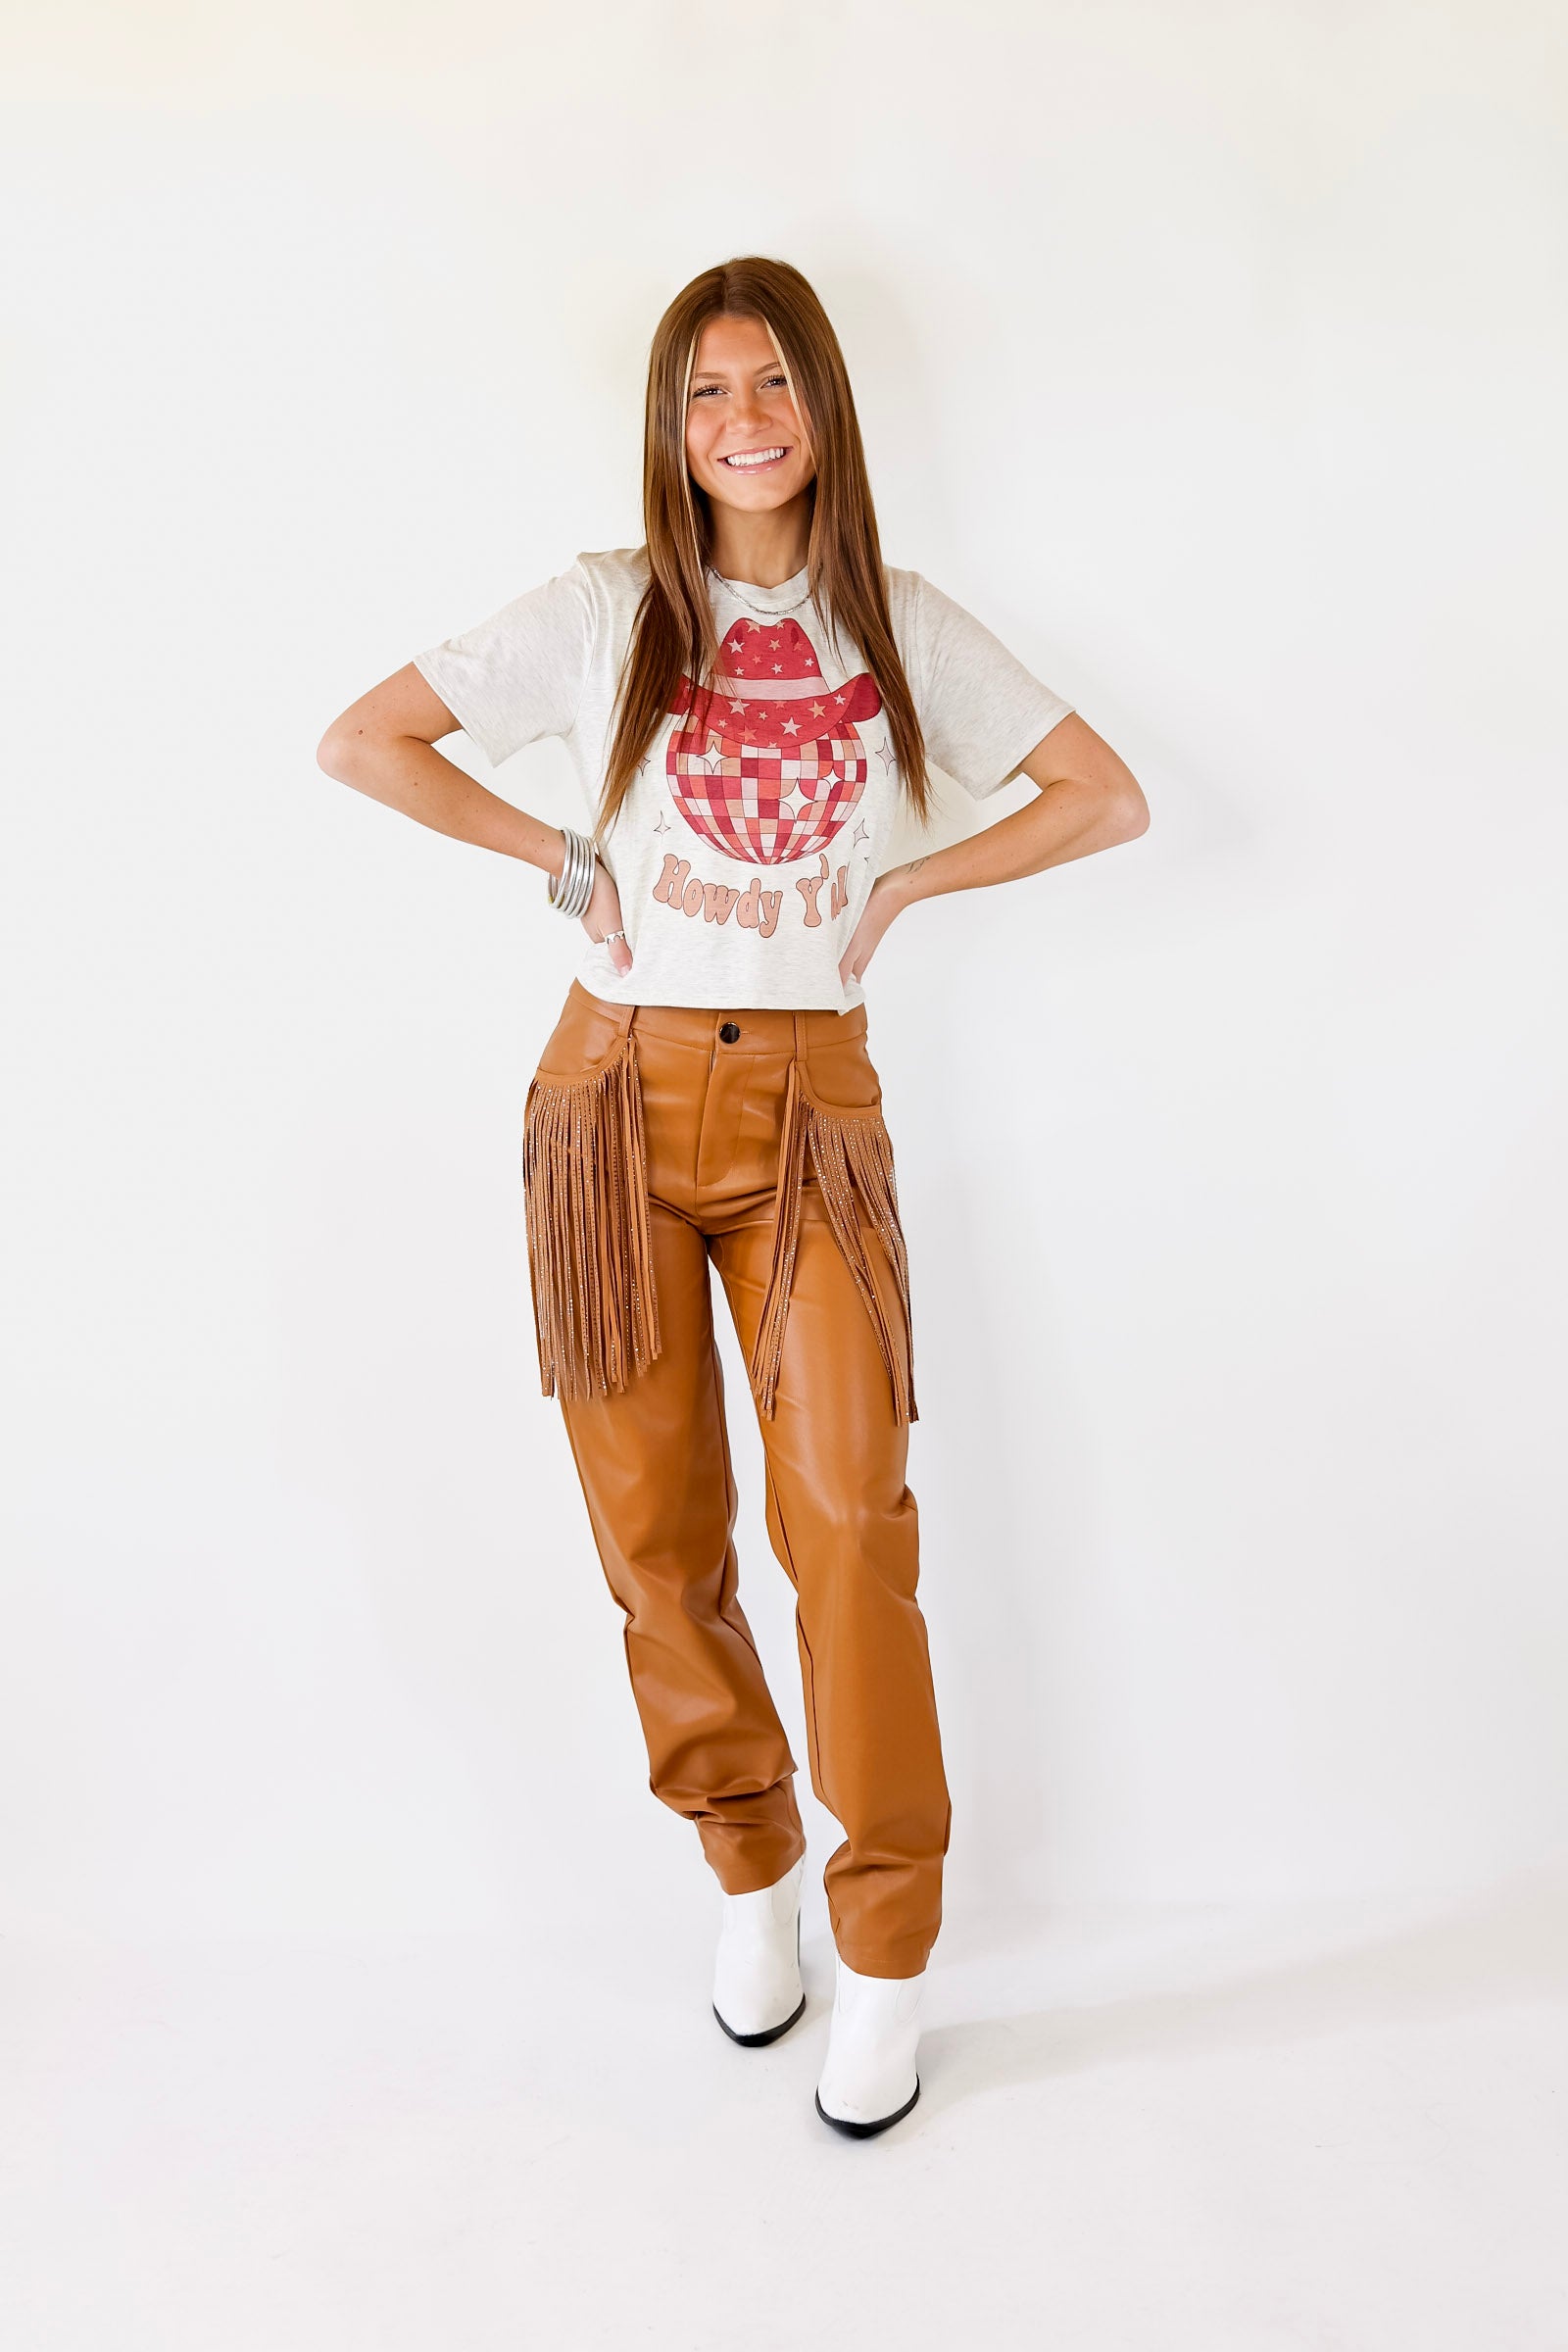 So Cute Howdy Y'all Crop Top in Off White - Giddy Up Glamour Boutique